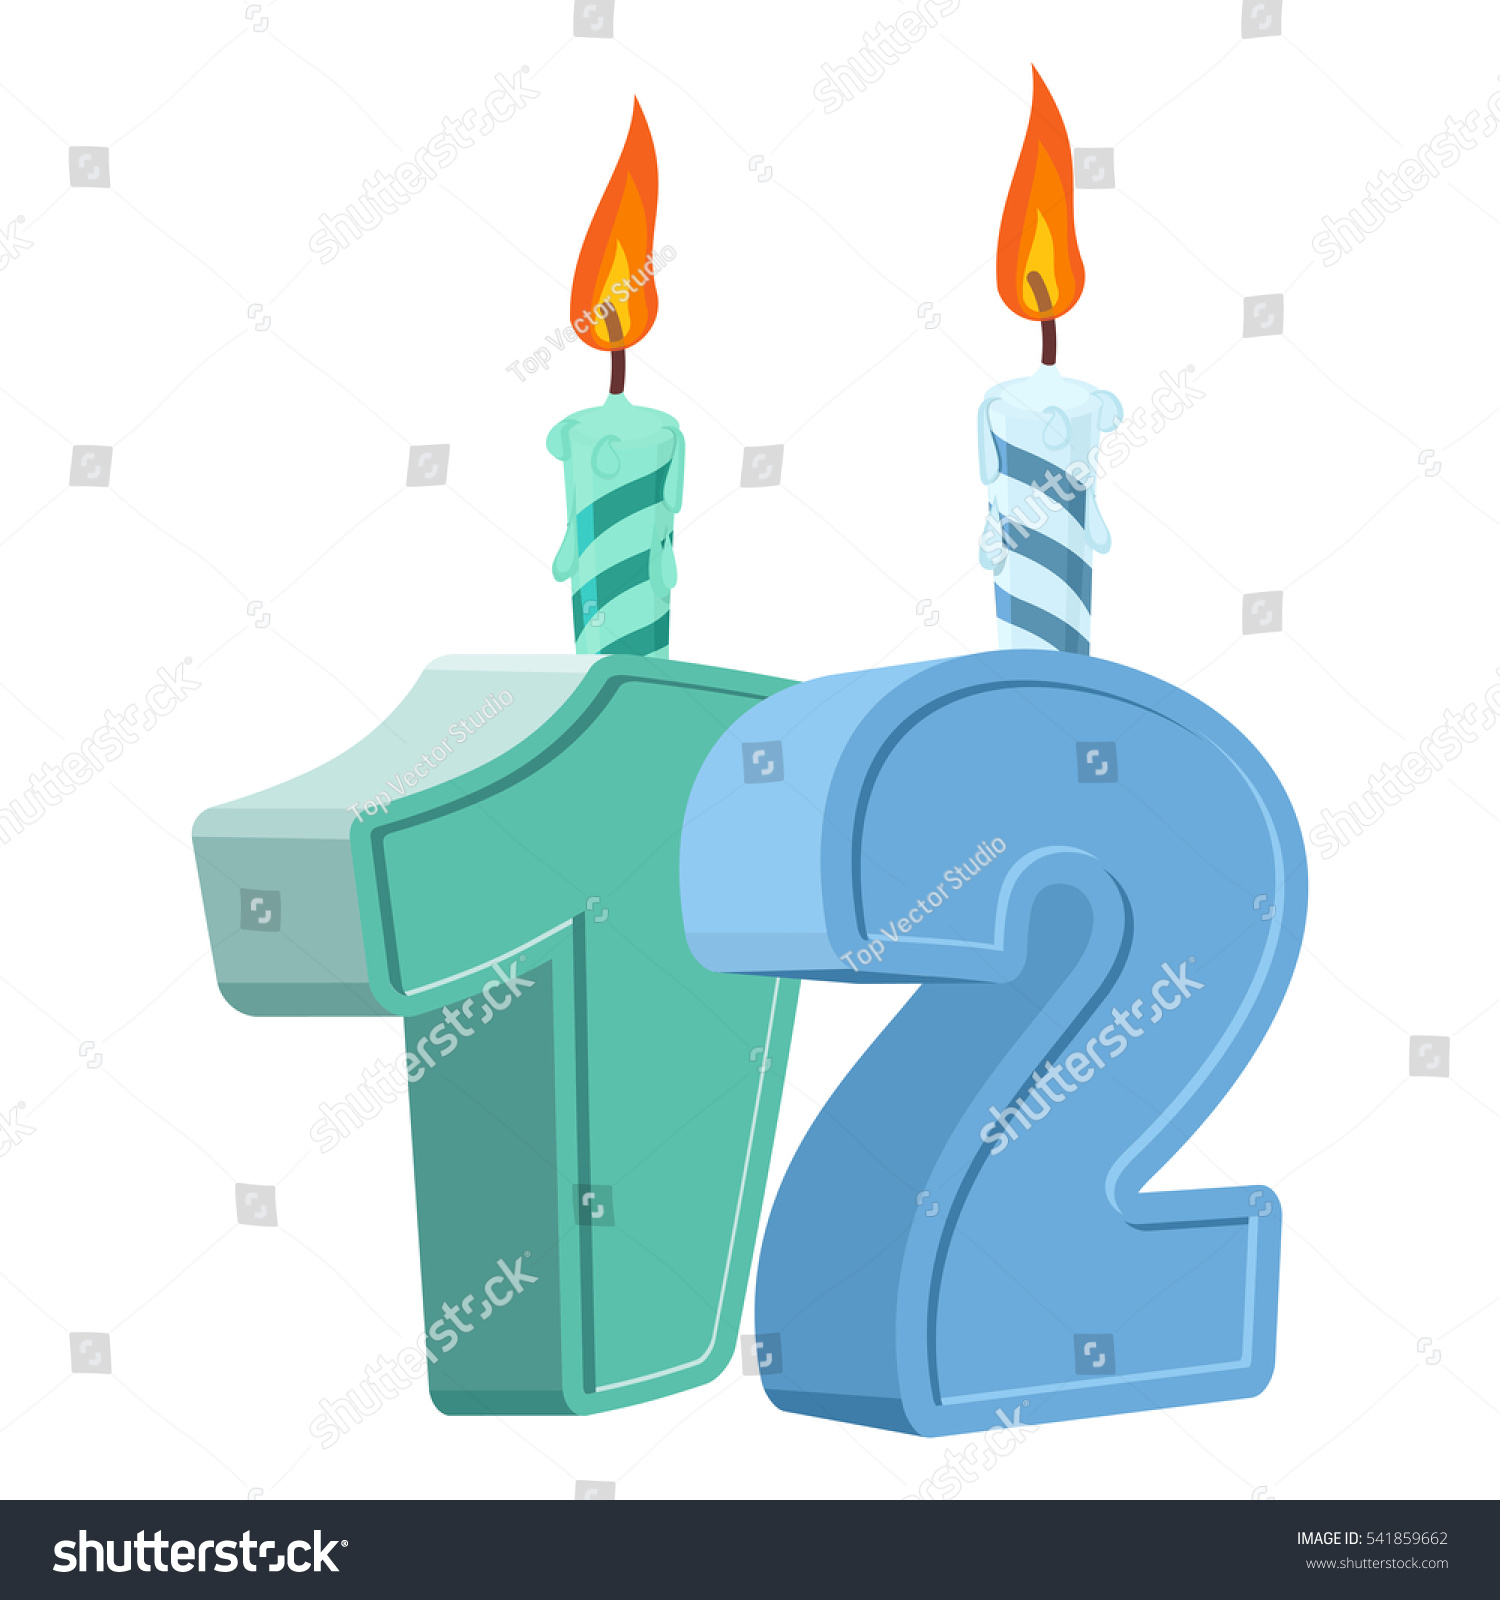 12 Years Birthday Number Festive Candle Stock Vector 541859662 ...